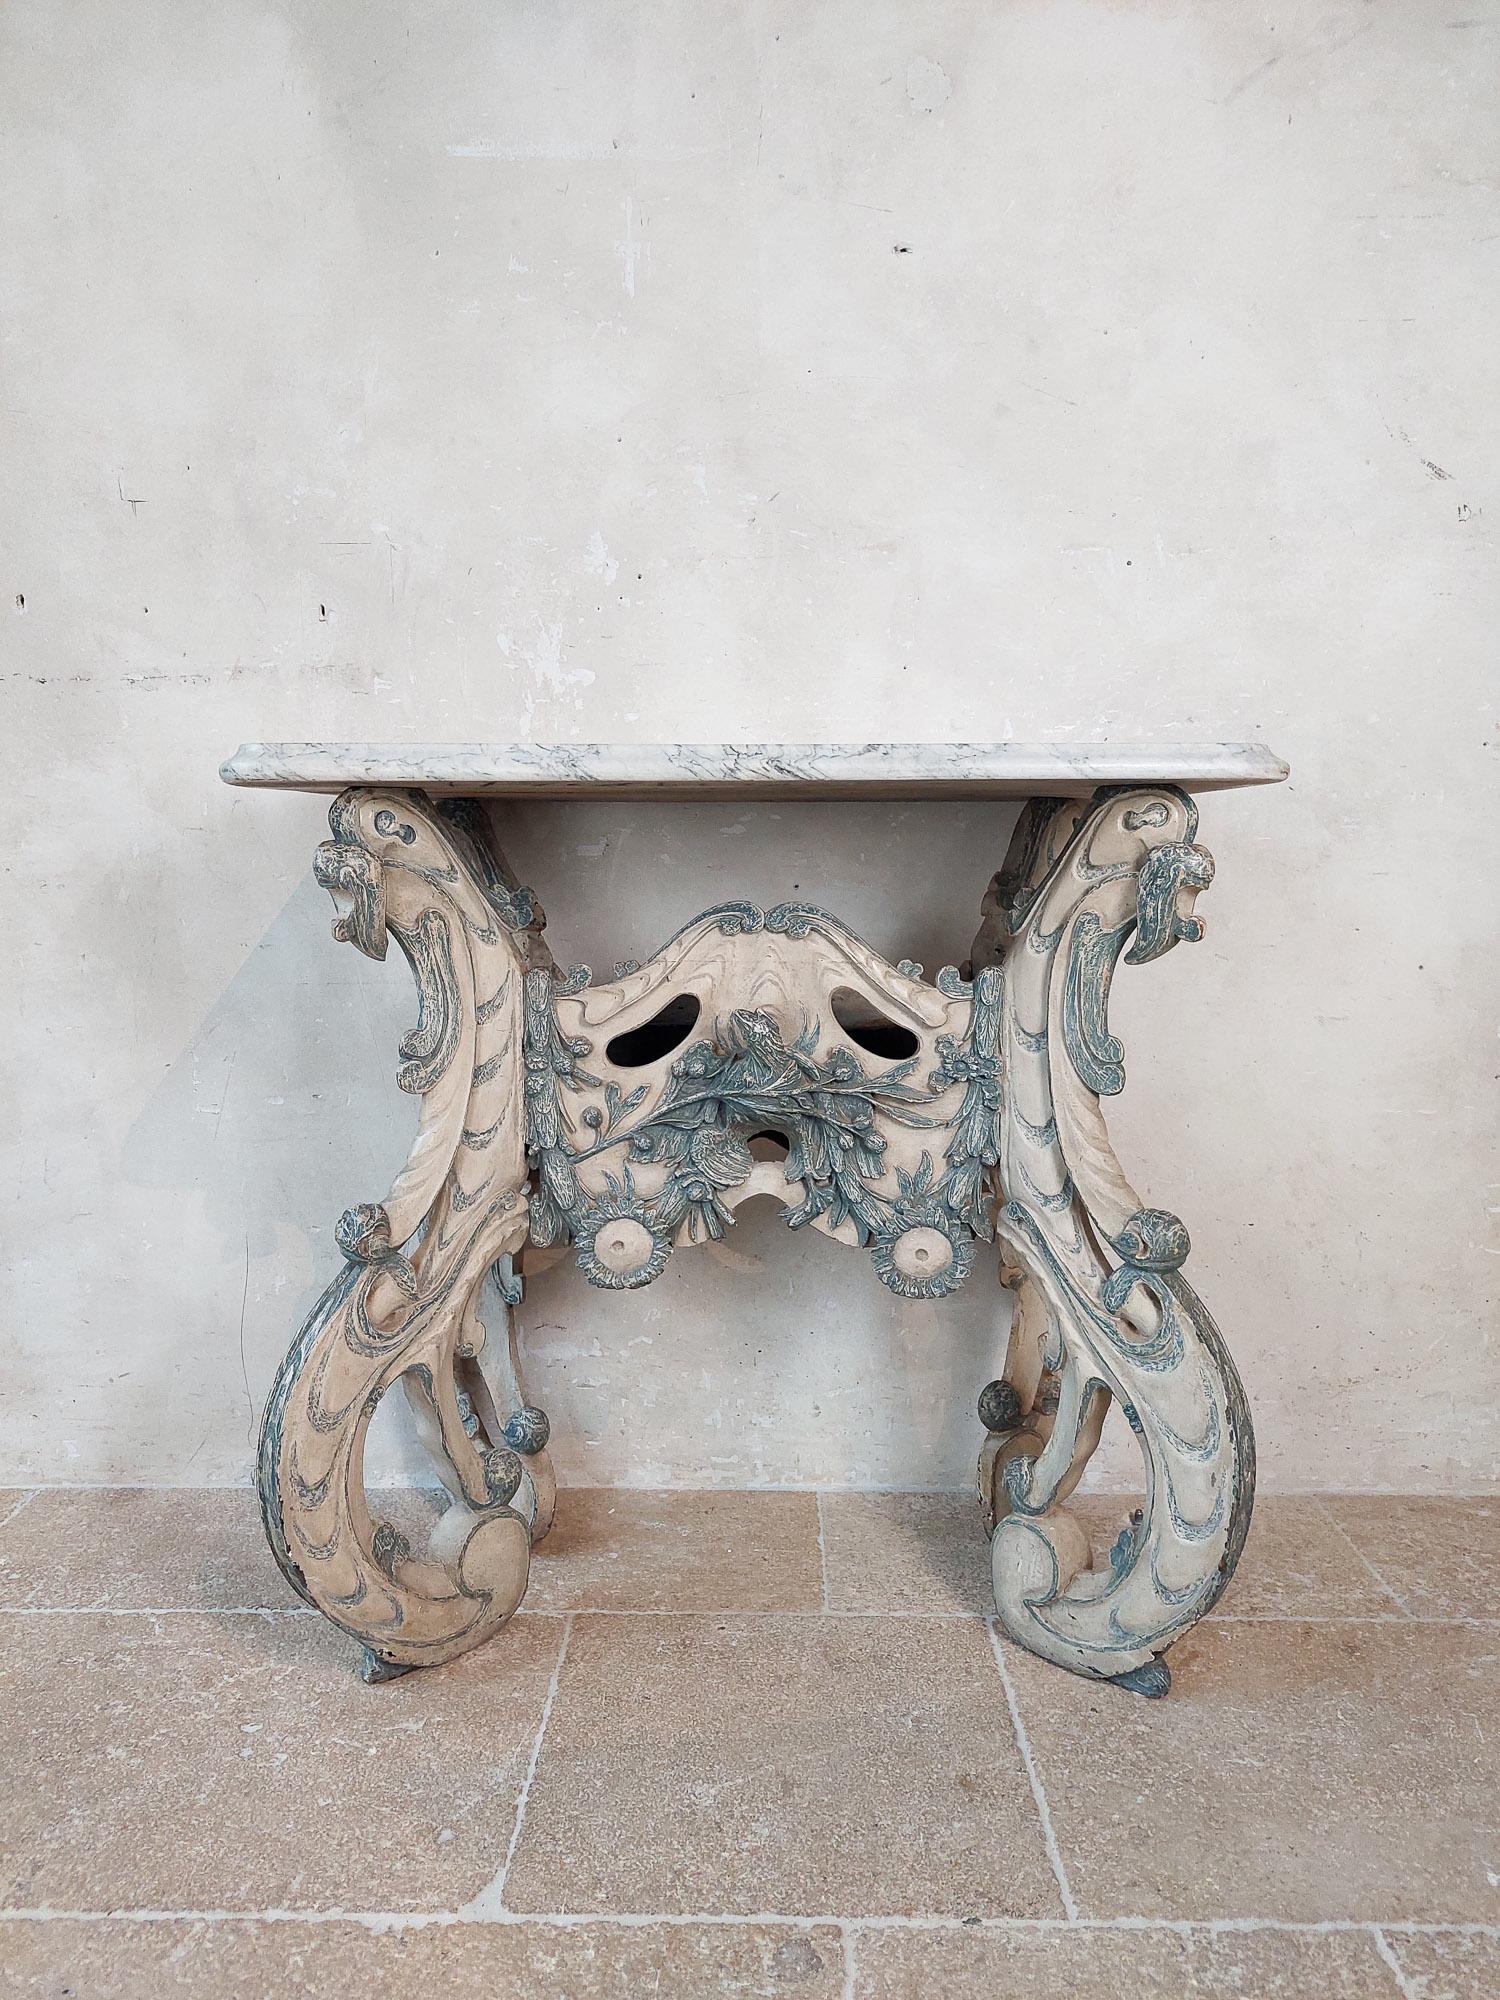 A Dutch carved blue and white painted limewood ‘kwab’ console or side table. Northern Netherlands, circa third quarter 17th century.

Console table with oblong white veined marble table top, on four S-curved feet, all carved with organic